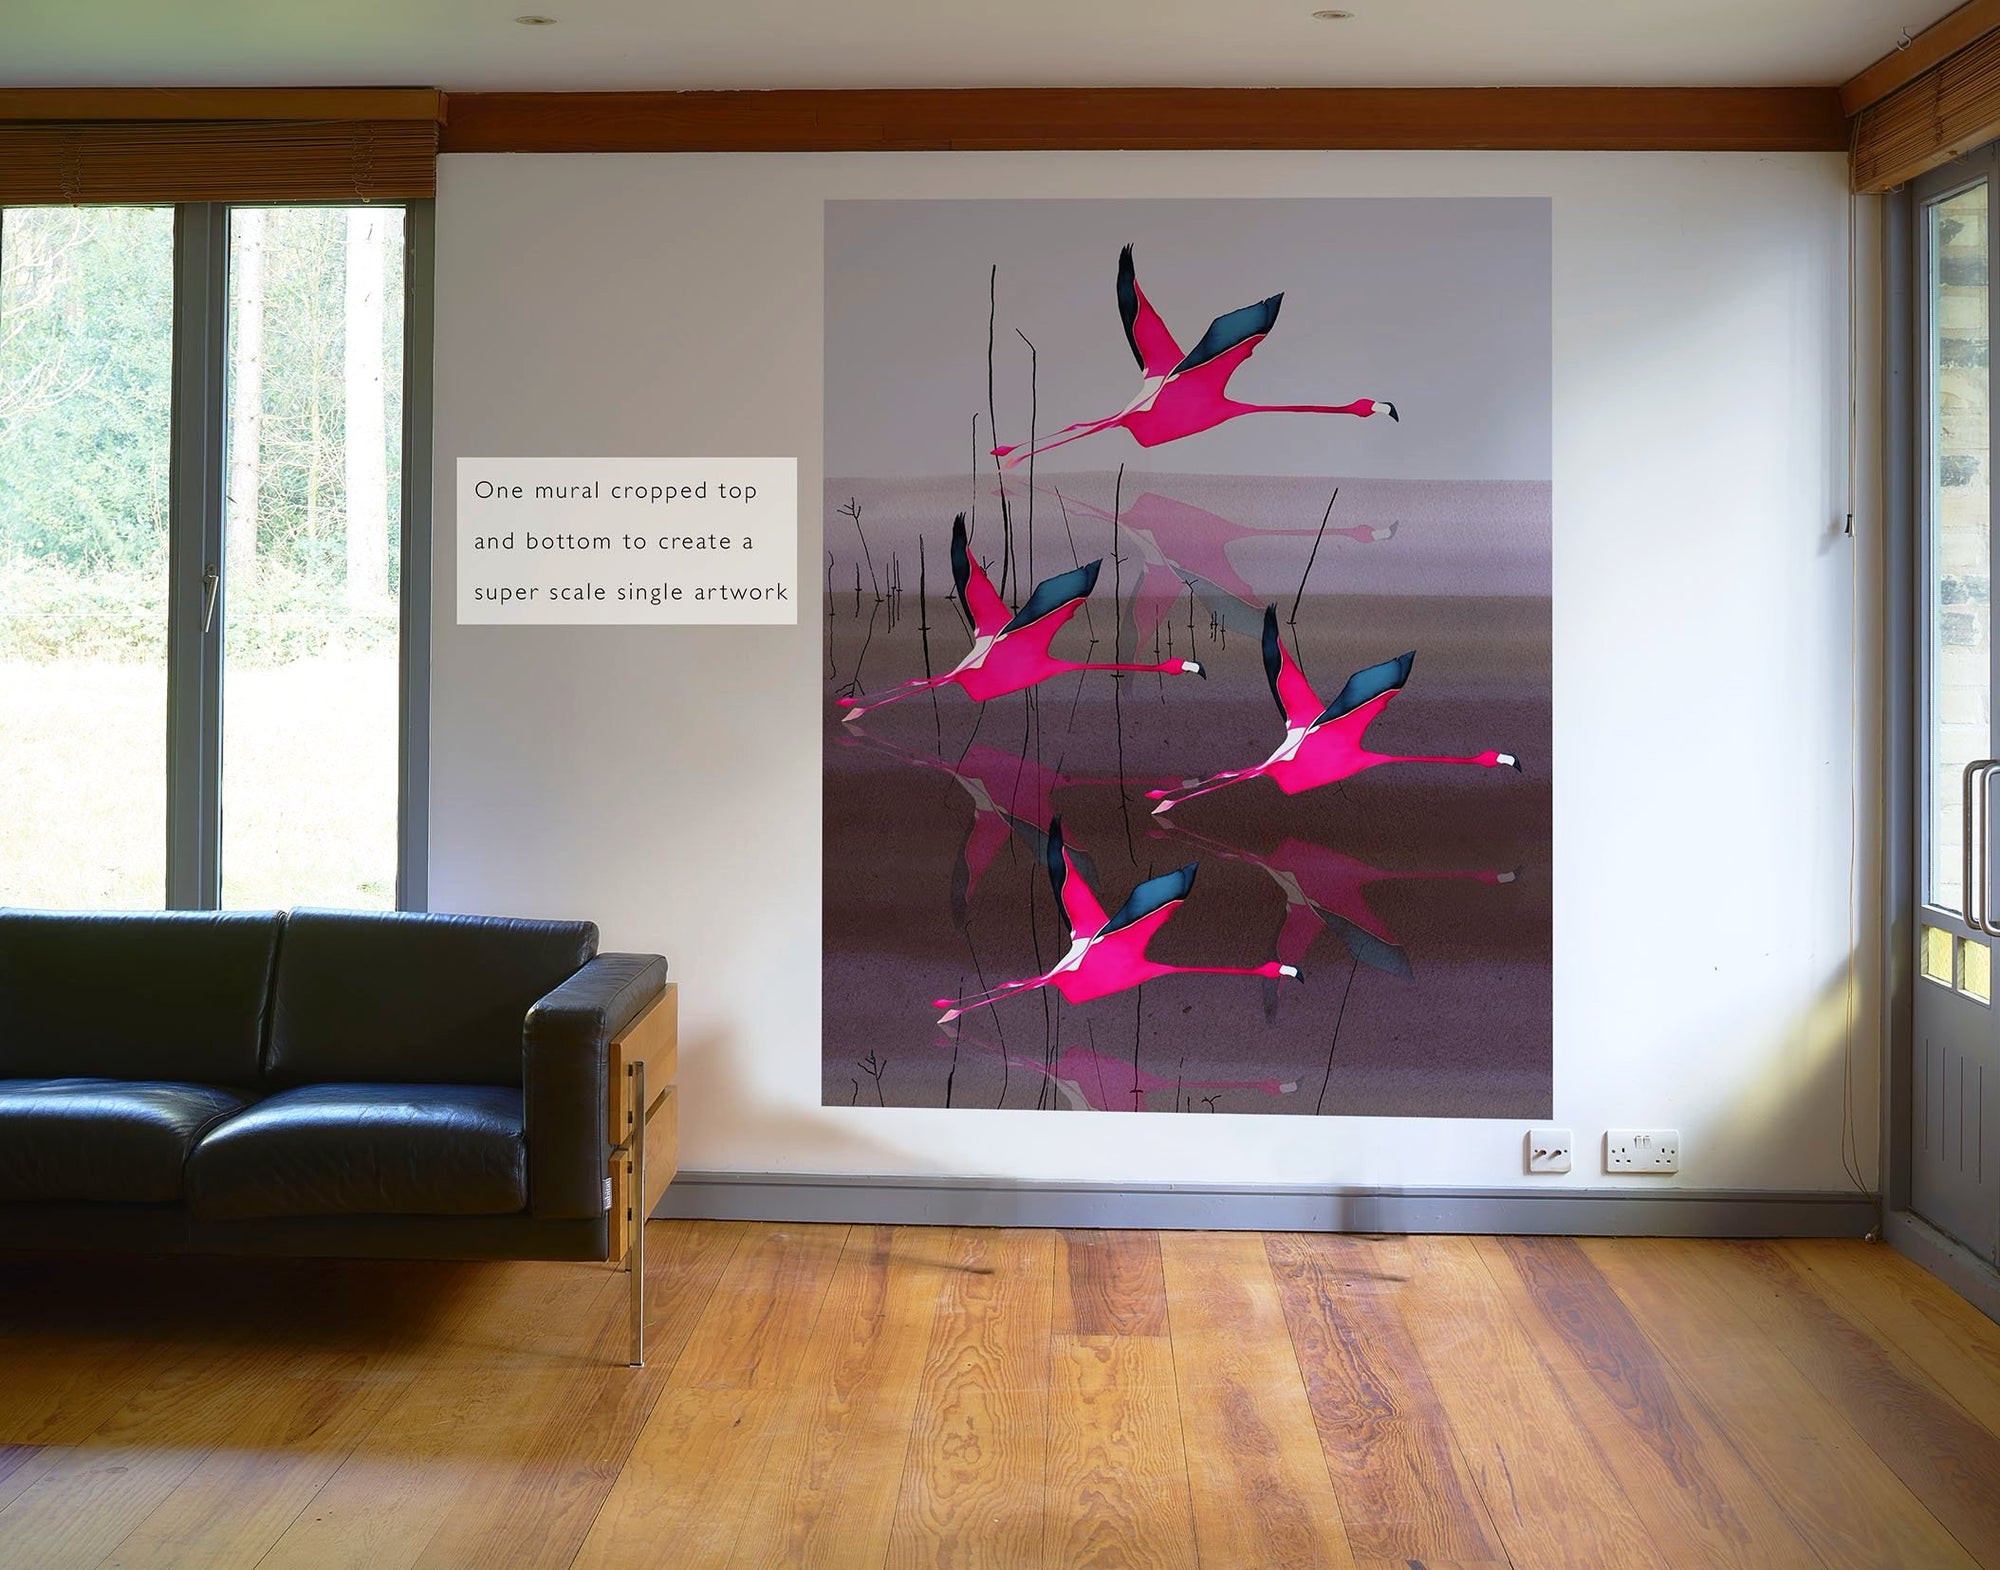 Breaking Dawn in Pink mural wallpaper by Anna Jacobs cropped as a super scale artwork in a mid century modern apartment